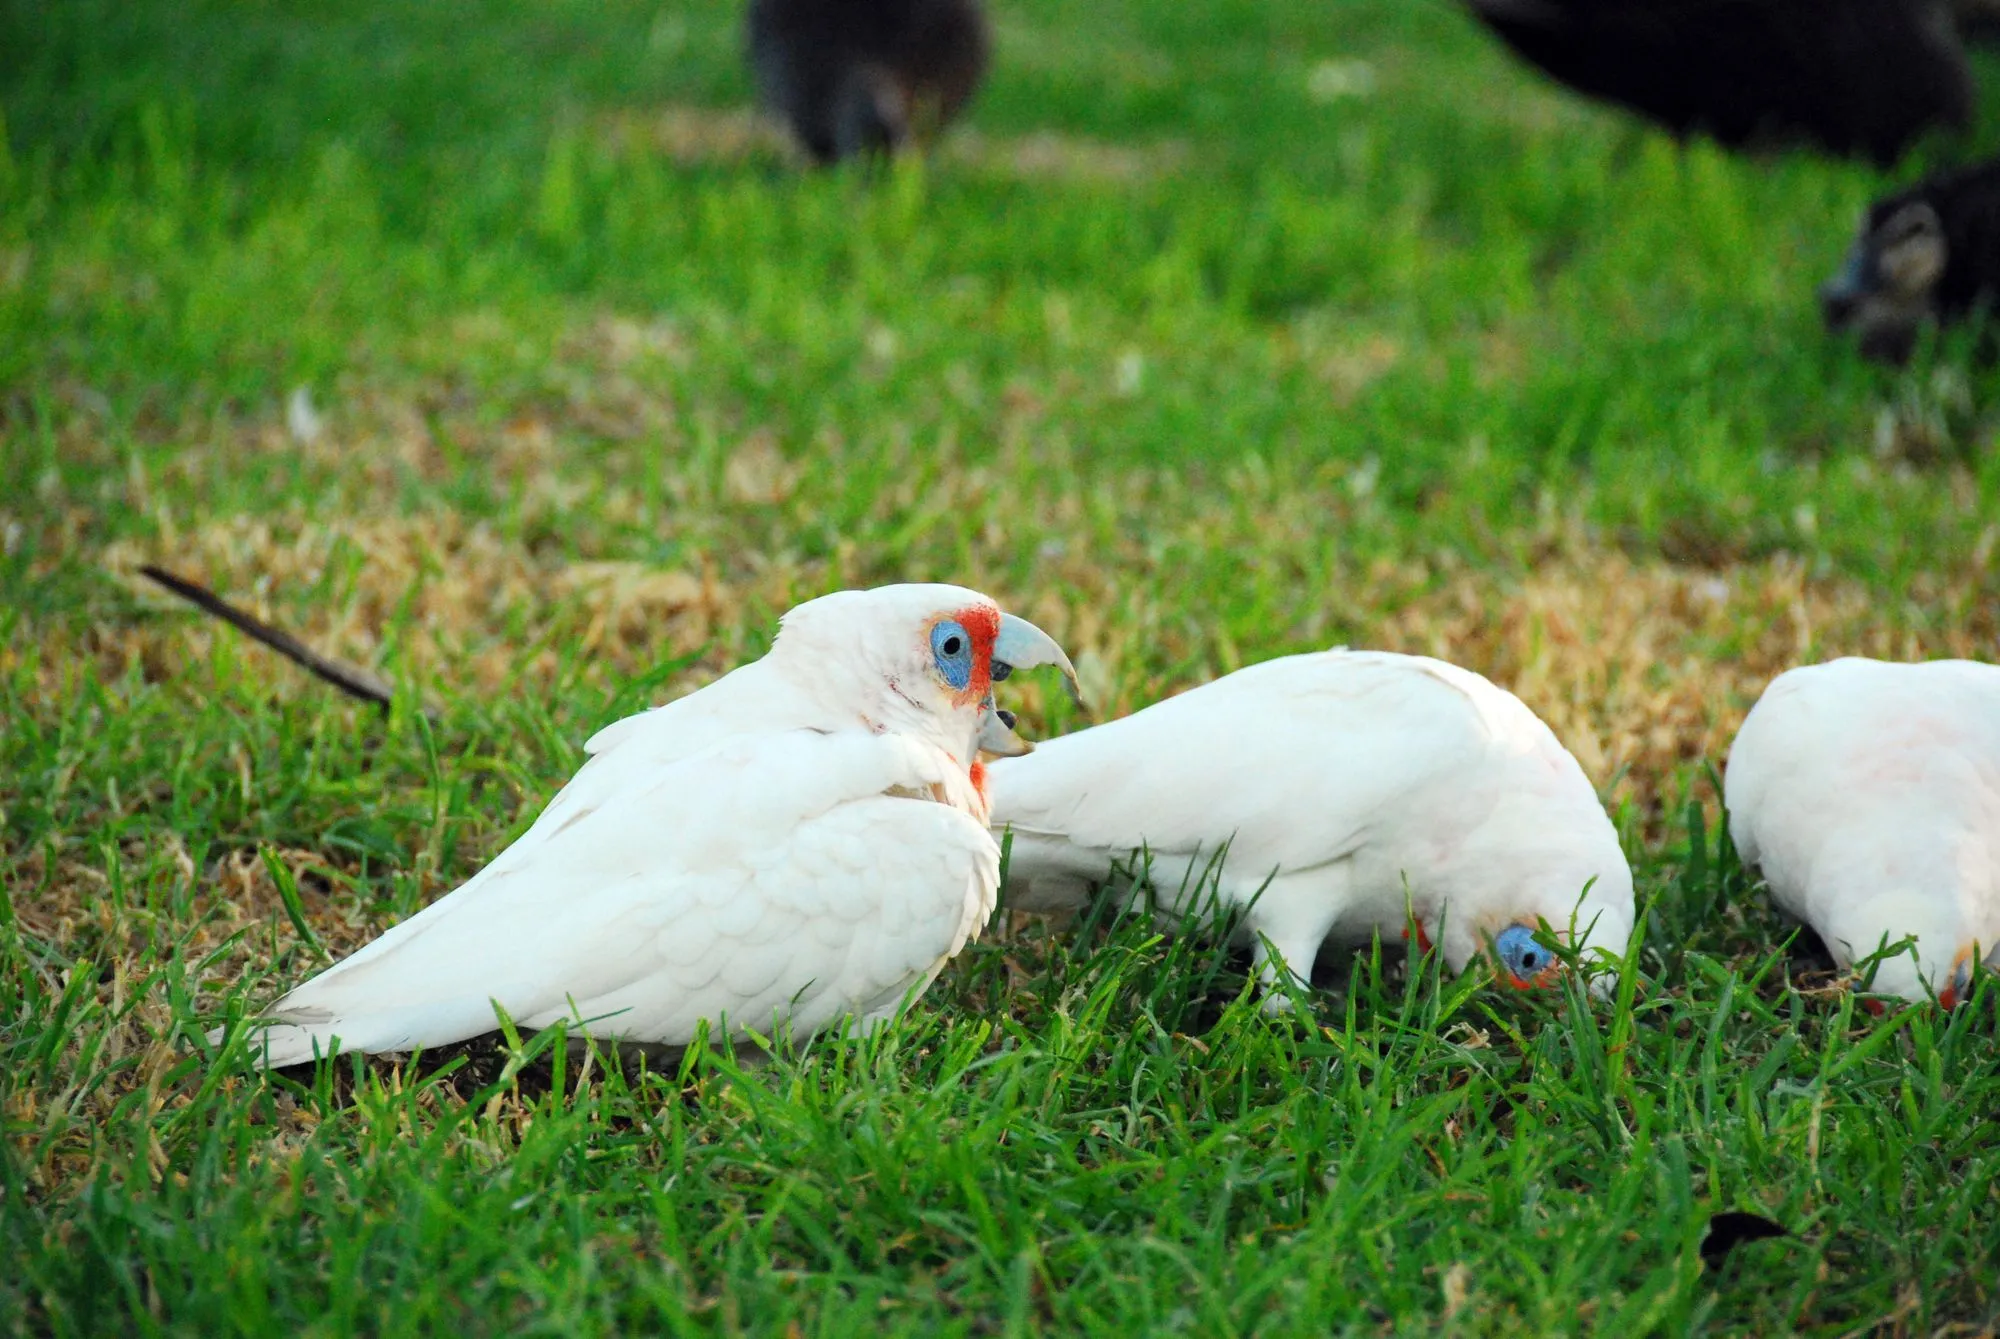 Slender-billed cockatoo facts are interesting to read.